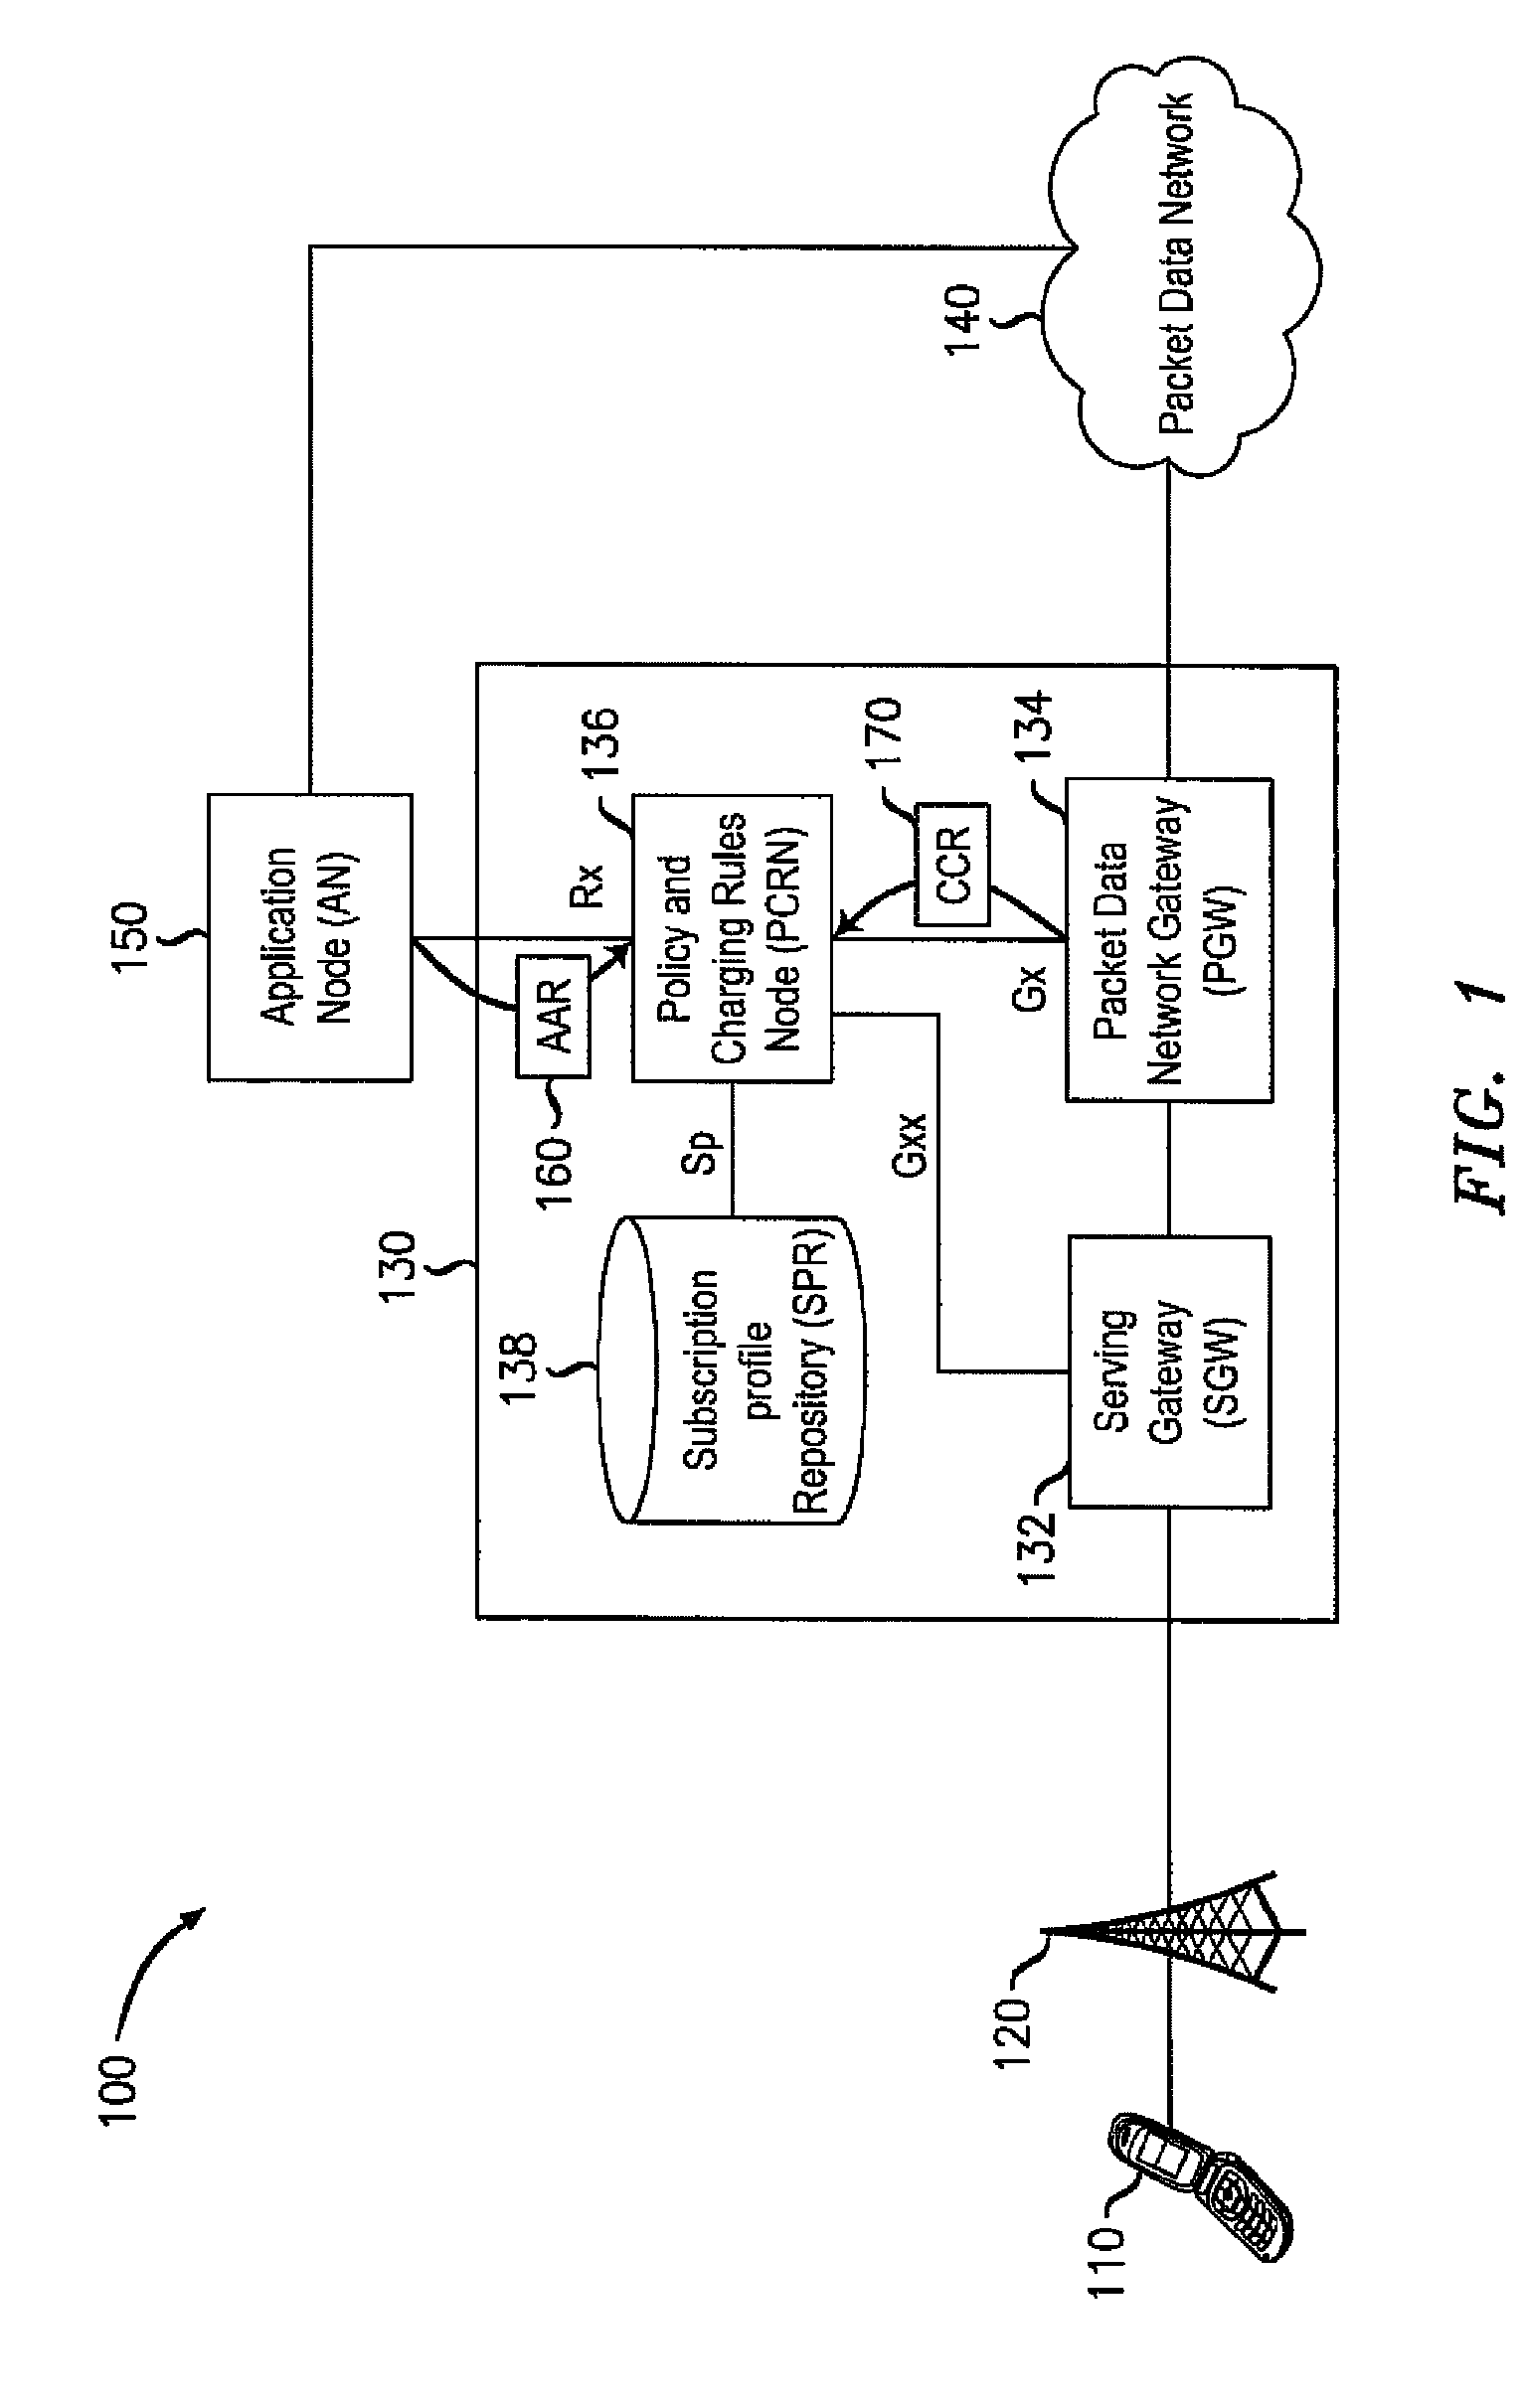 Method of distributing PCC rules among IP-connectivity access network (IP-CAN) bearers